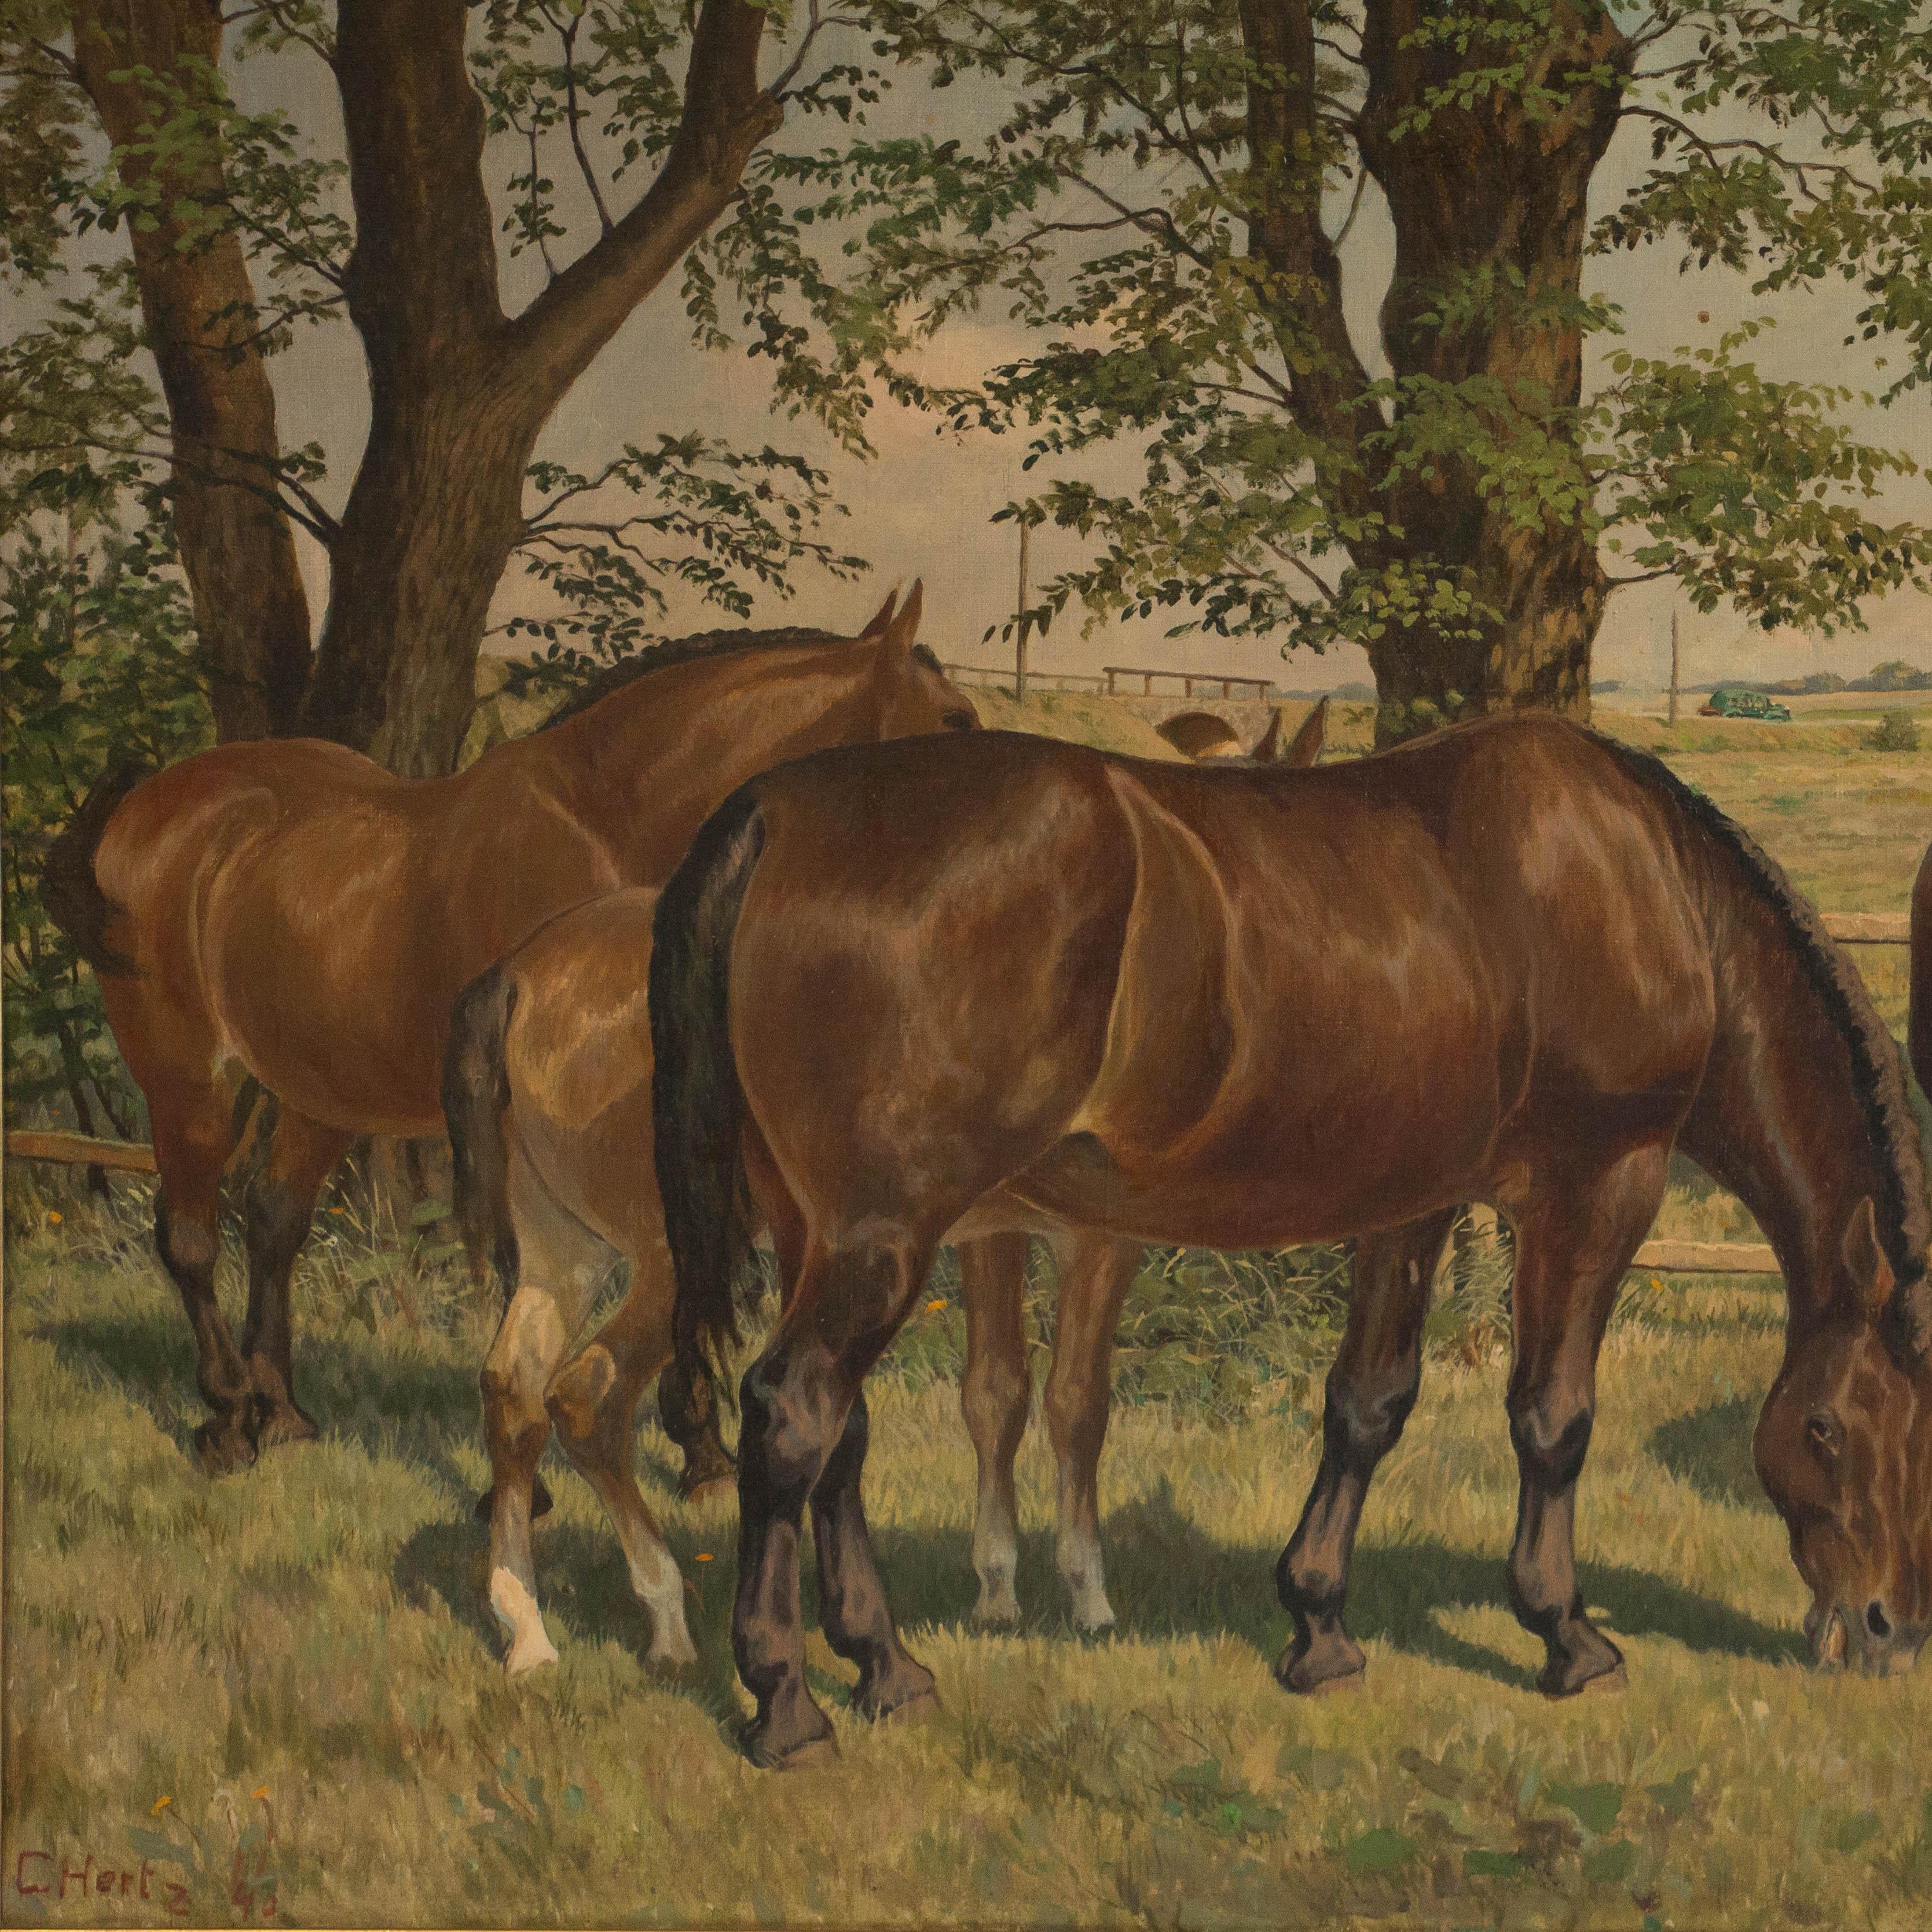 This original early 20th century landscape oil painting, with lots of detail, features a small herd of horses in a grassy field. Mounted in a gold painted frame, the painting is signed and dated C Hertz '40 in the lower left by Danish artist Carl